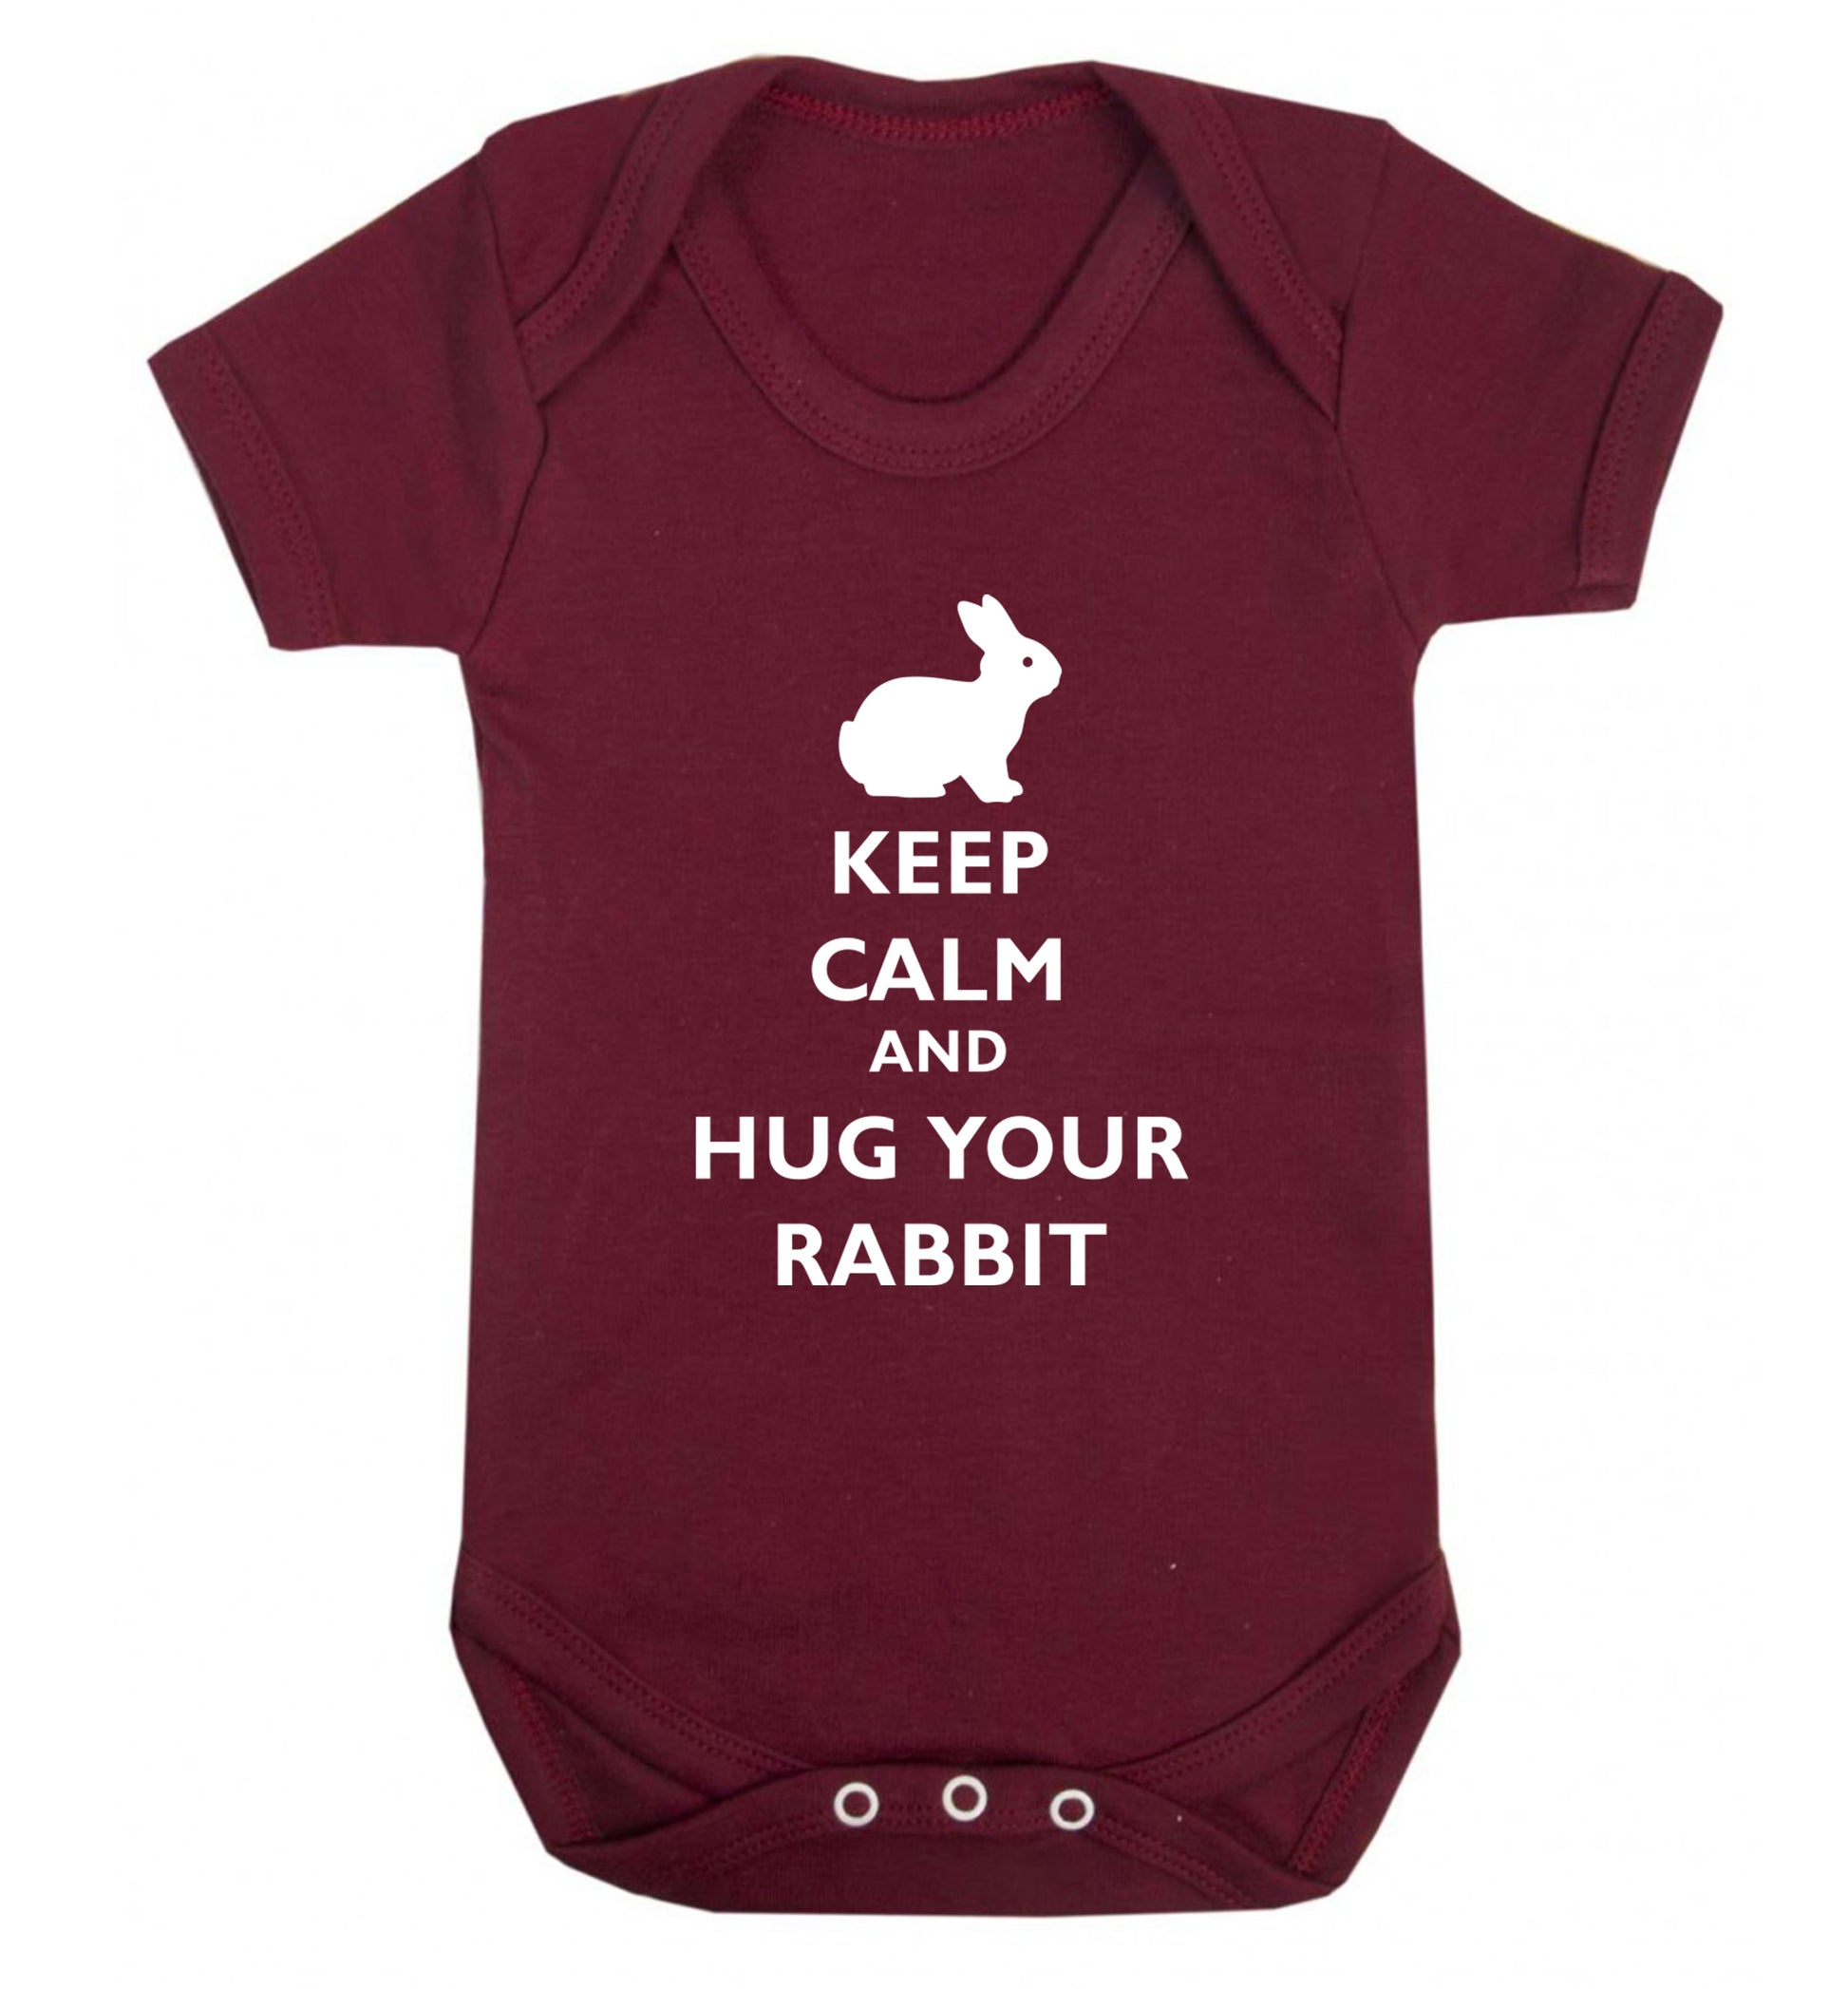 Keep calm and hug your rabbit Baby Vest maroon 18-24 months